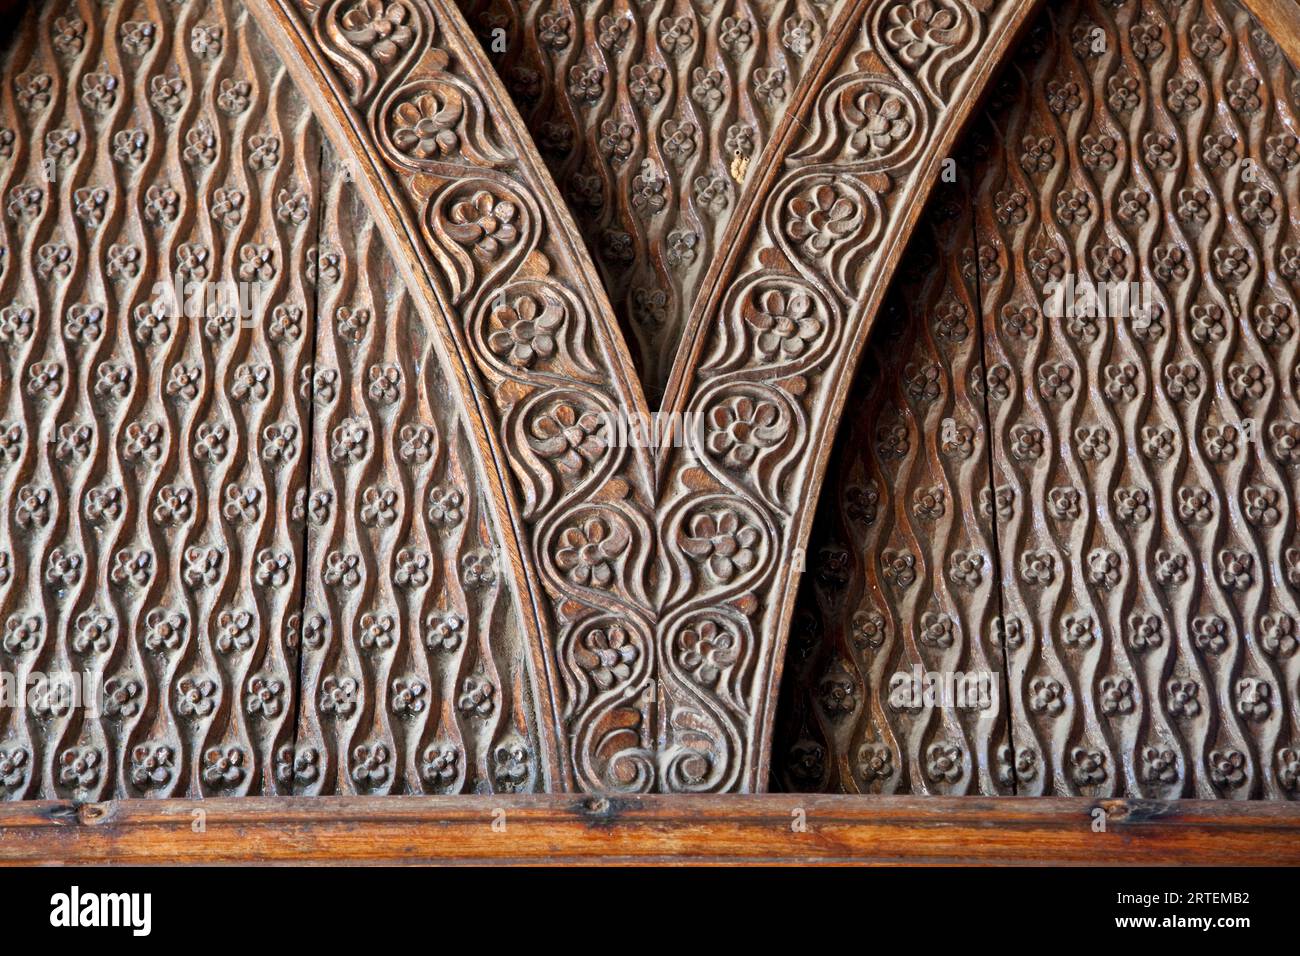 Detailed wood carving of flowers and patterns; Zanzibar Stock Photo